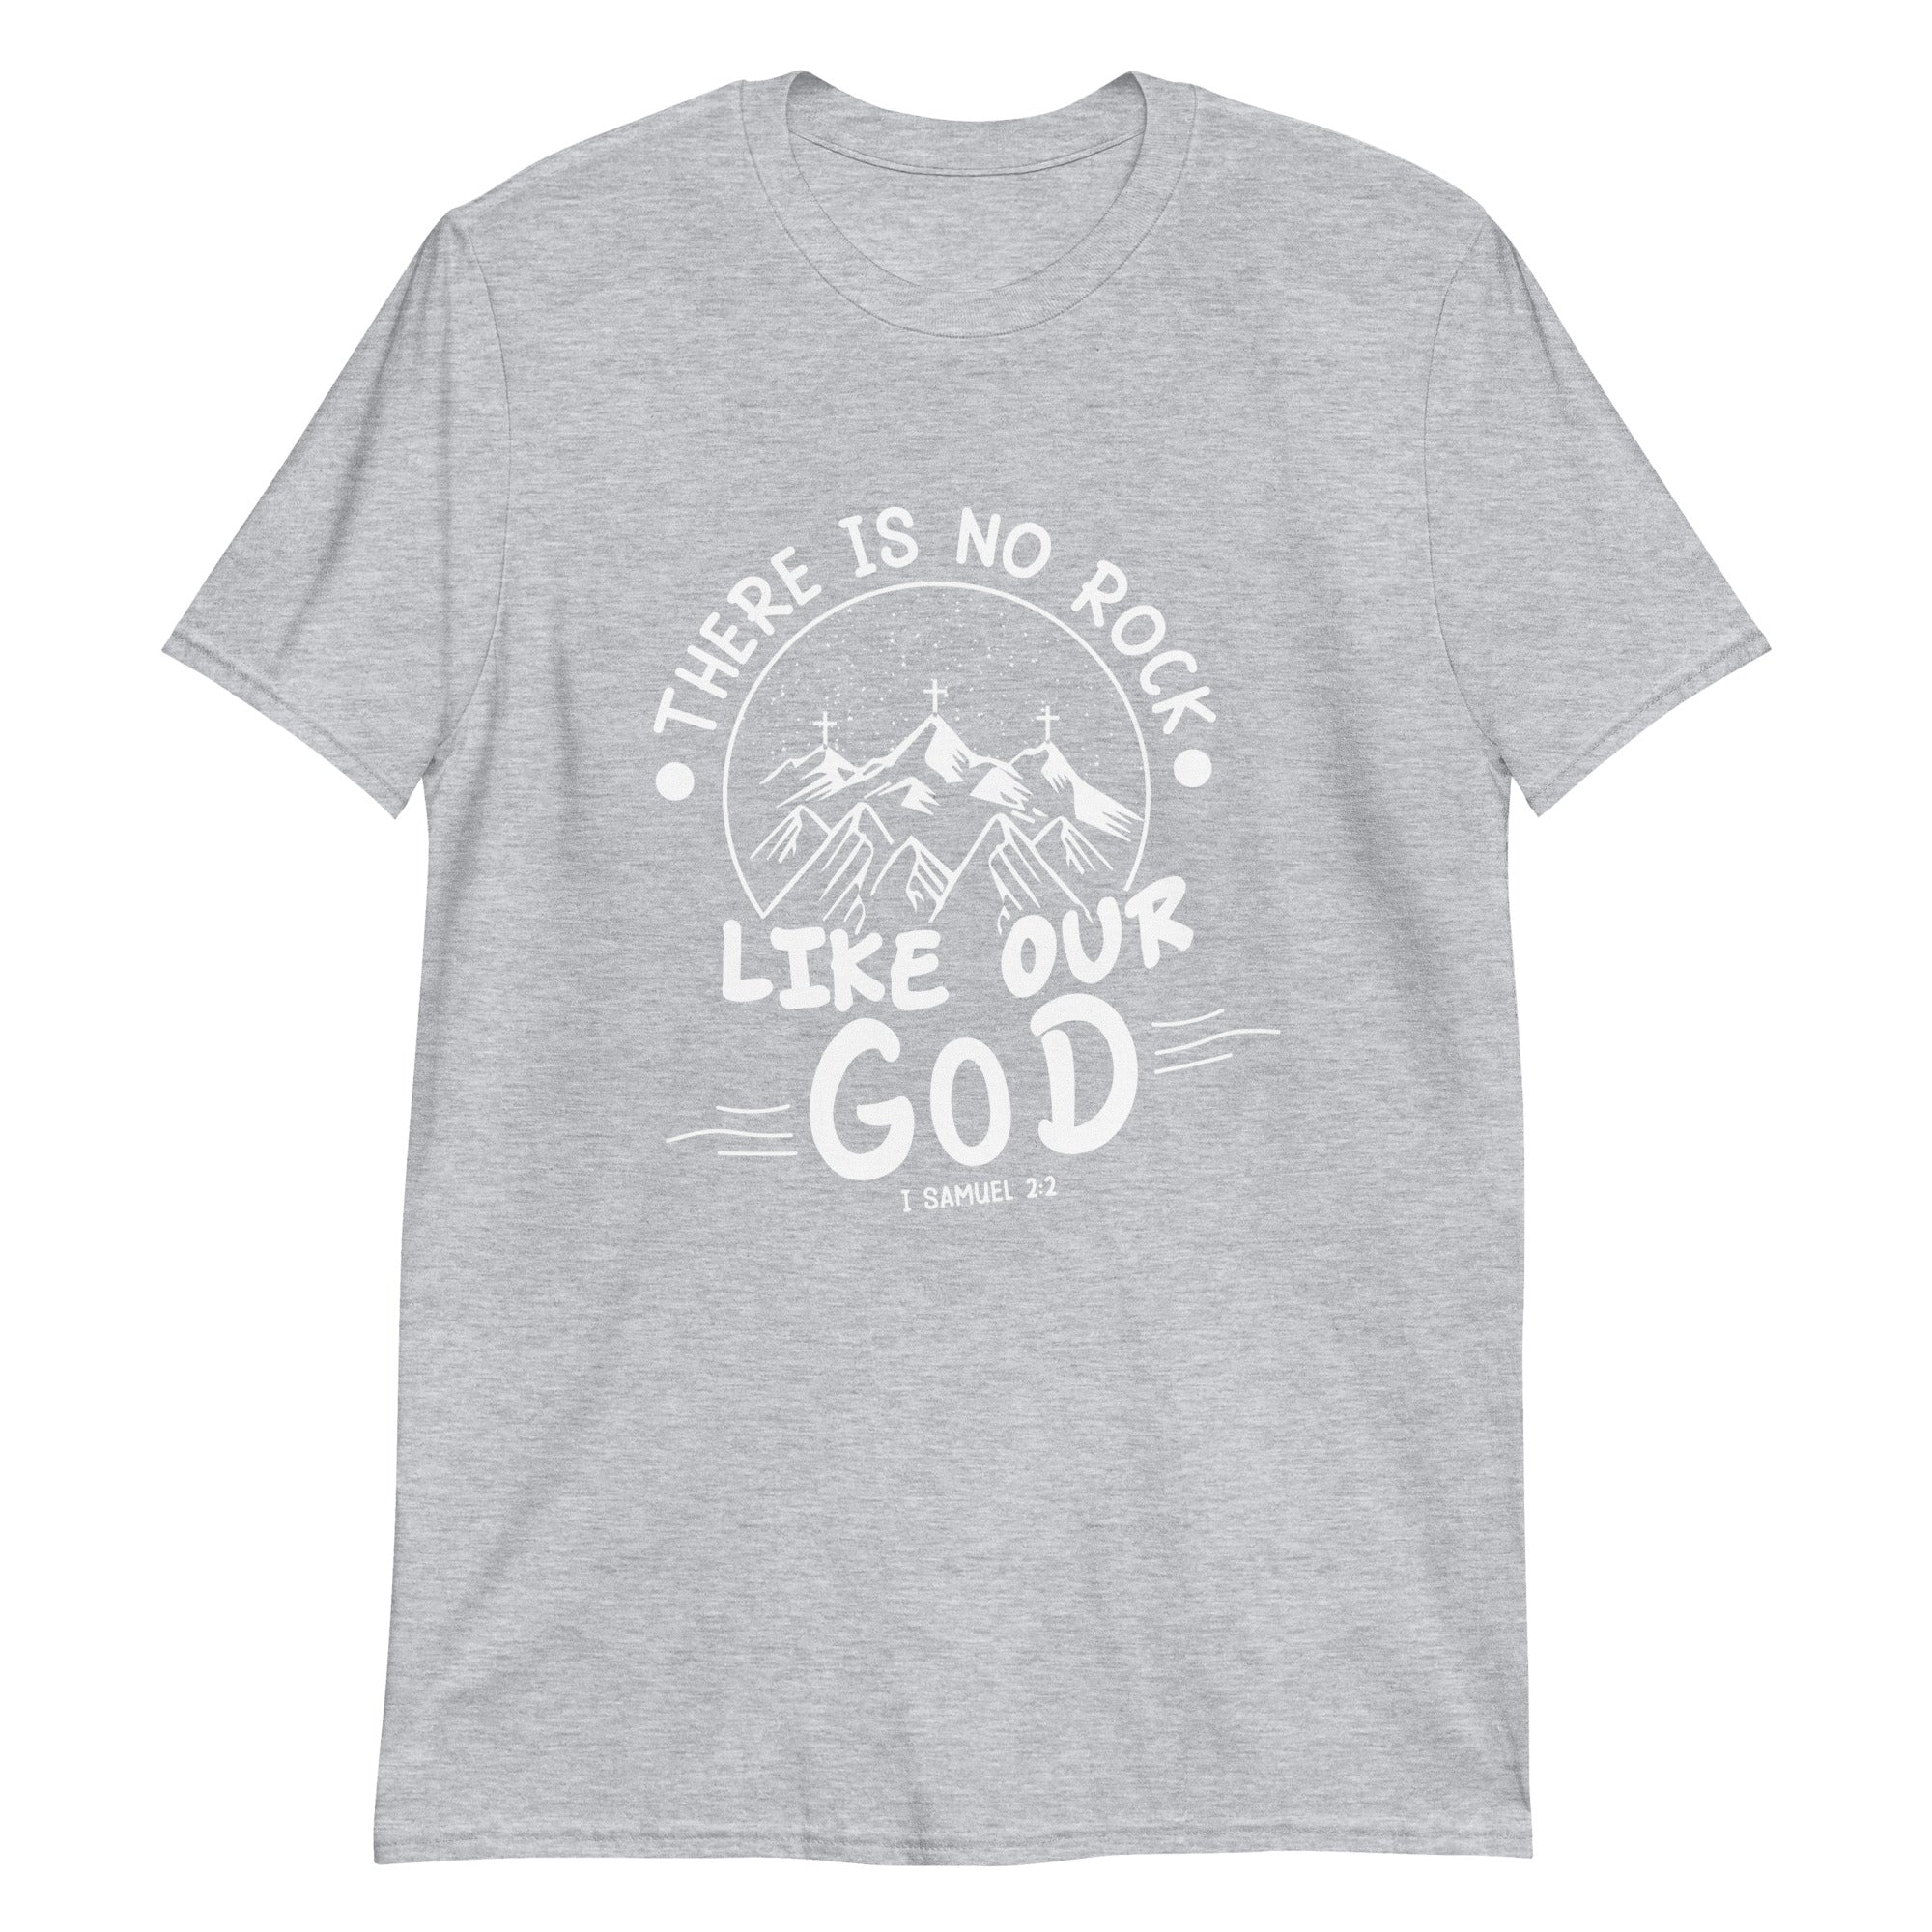 There is No Rock Like Our God Christian Short-Sleeve Unisex T-Shirt